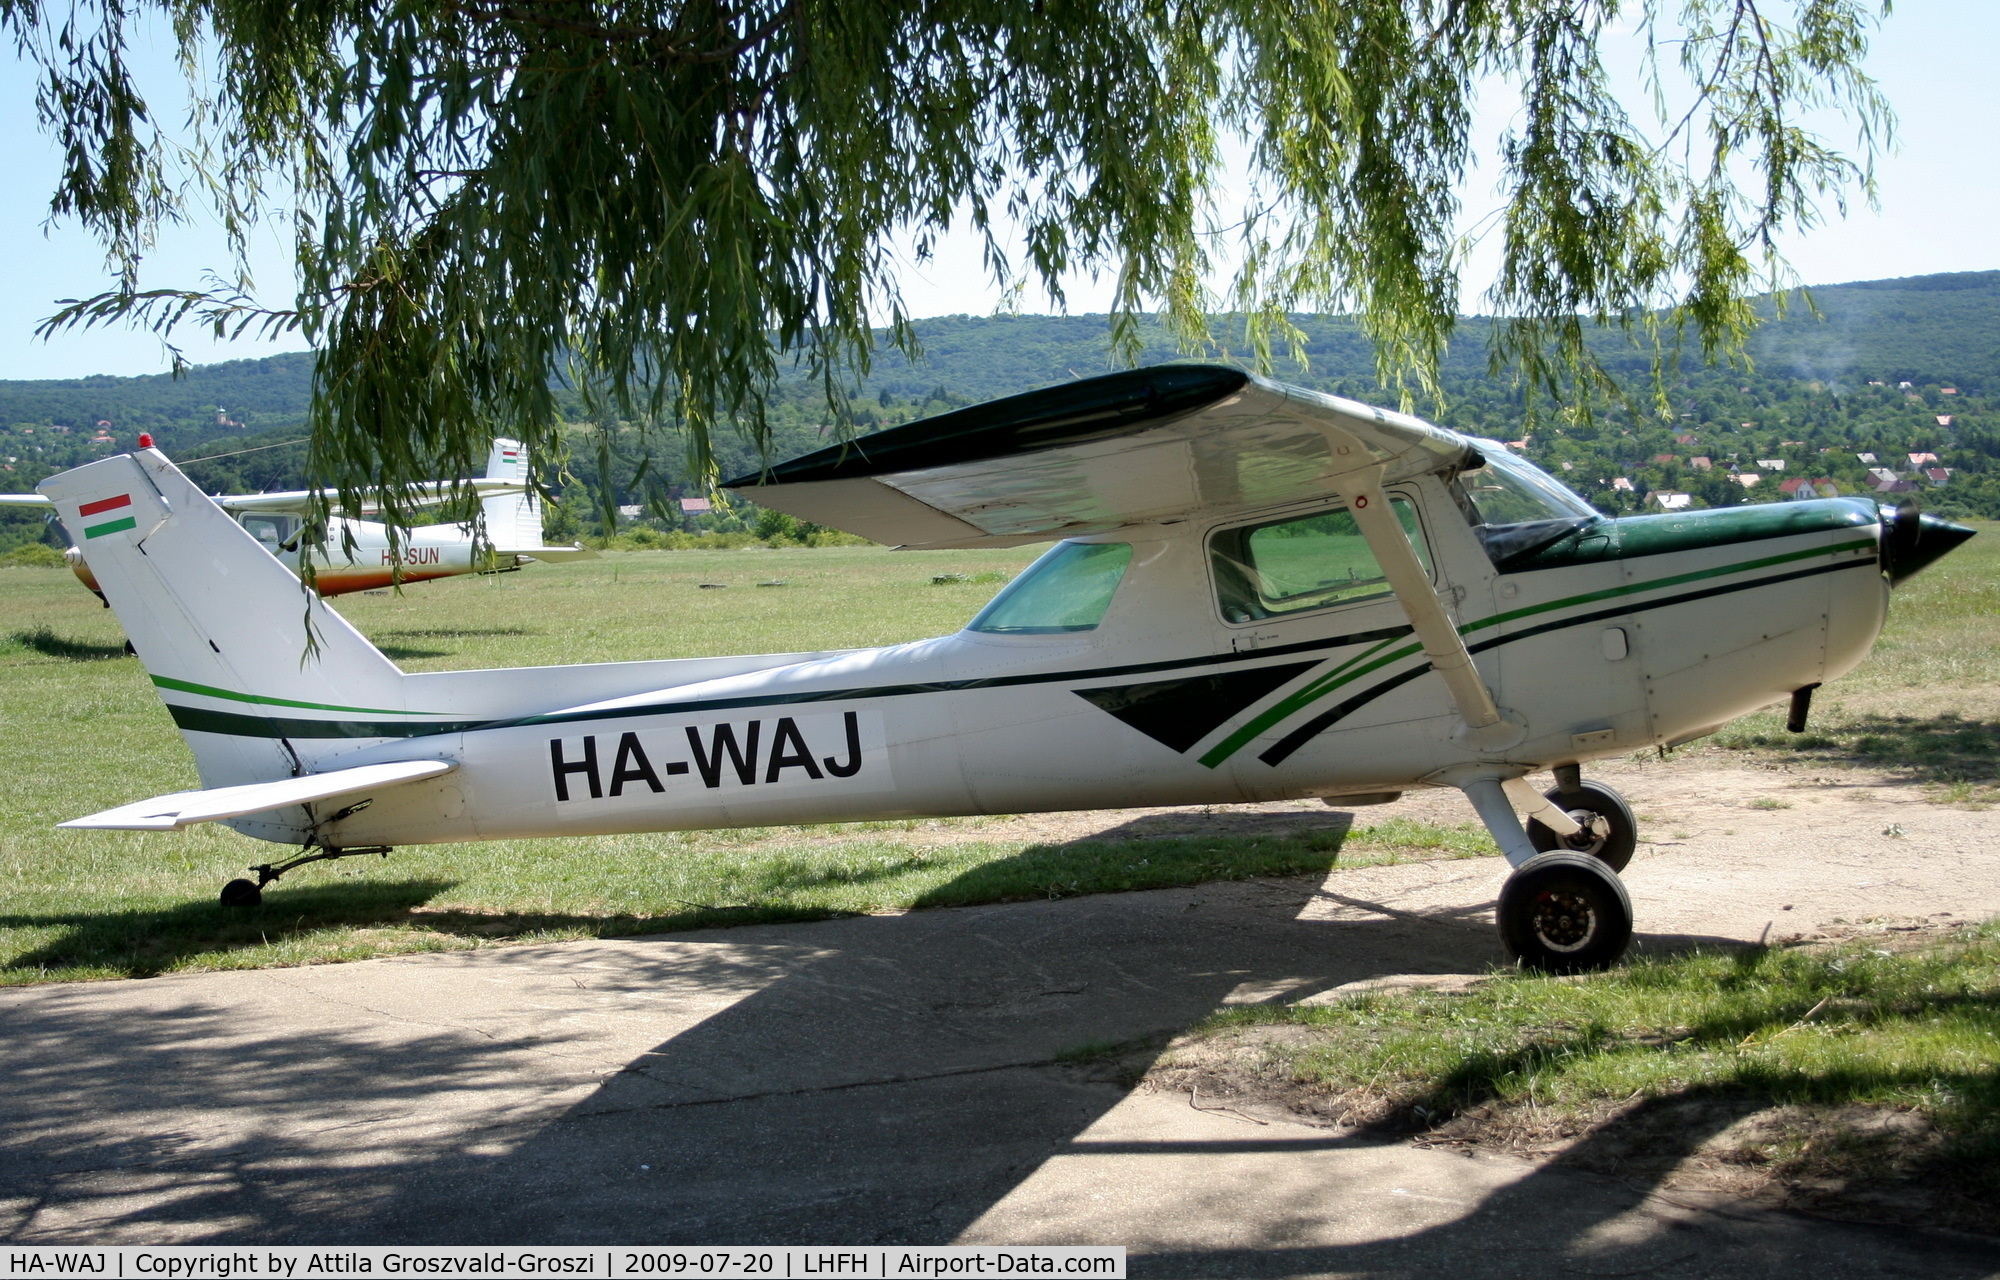 HA-WAJ, 1980 Cessna 152 C/N 152-83188, Farkashegy Airport Hungary / LHFH - That little Cessna 152 machines one, which are tail runner